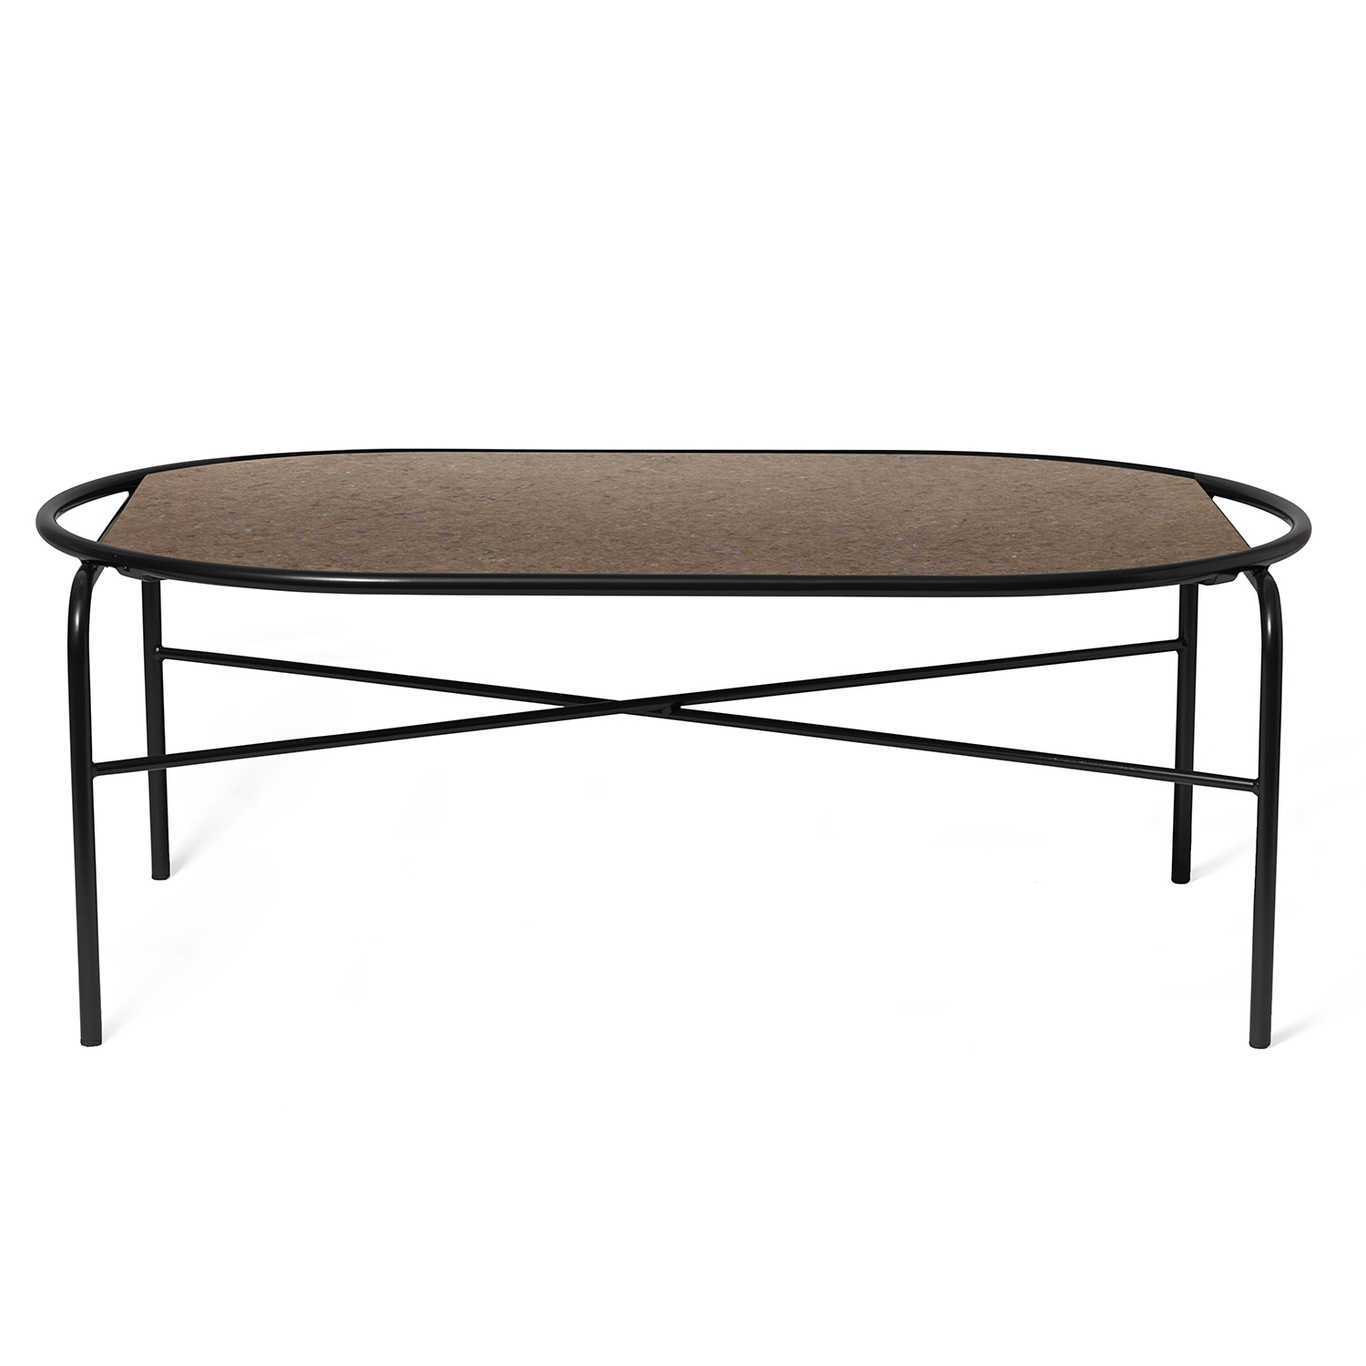 Secant Coffee Table Oval, Antique Brown